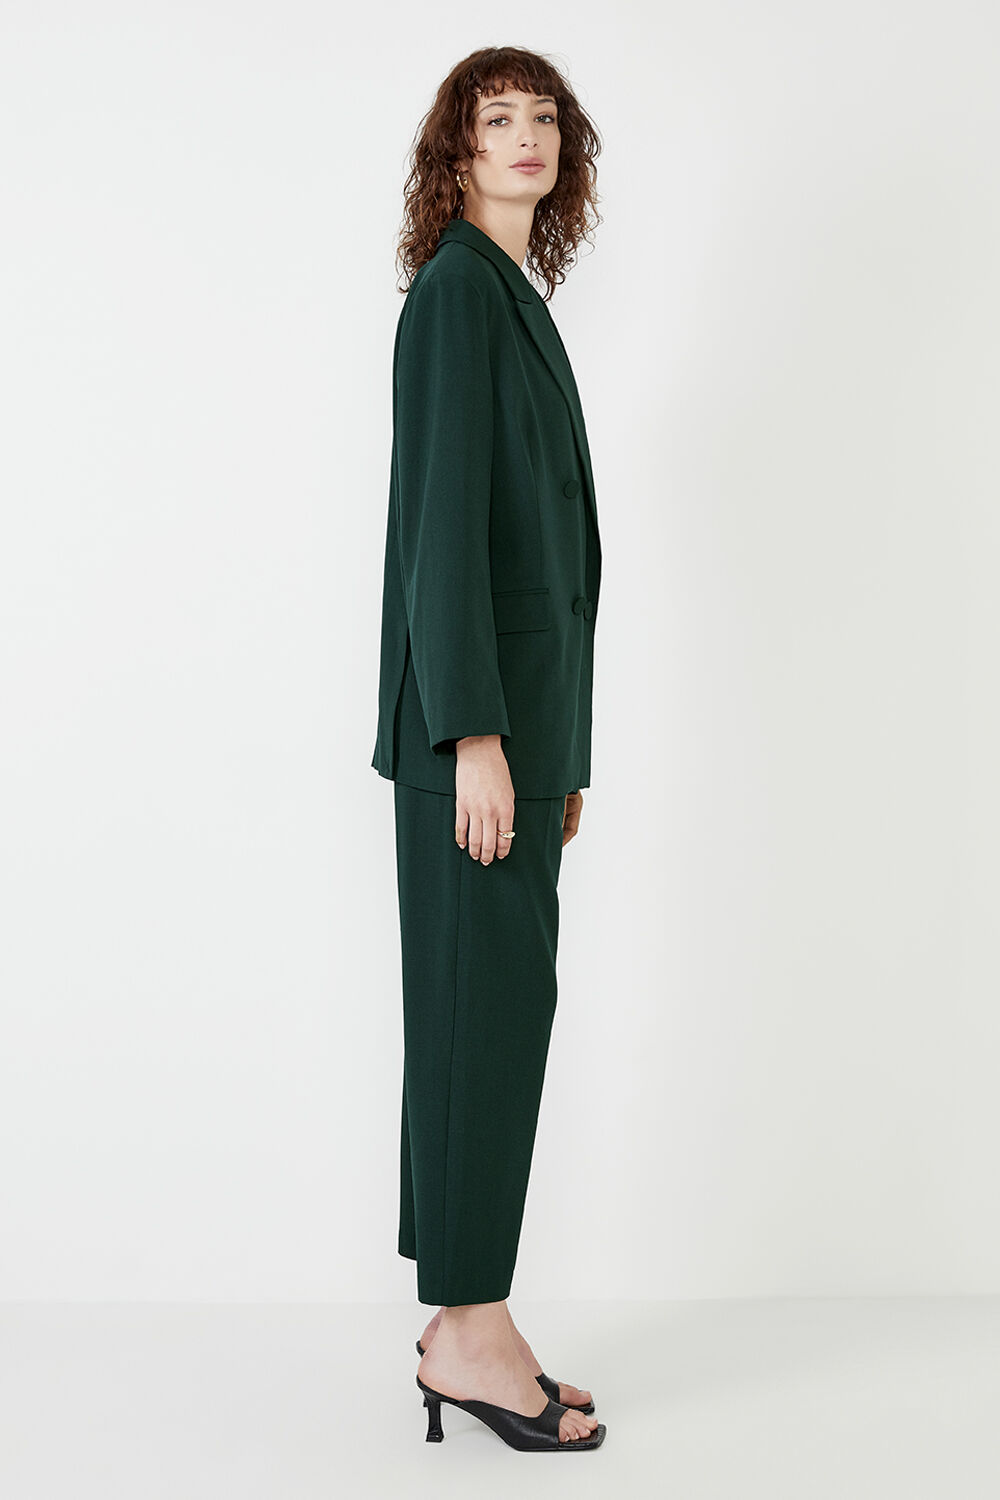 TUCK FRONT TROUSER in colour FOREST GREEN